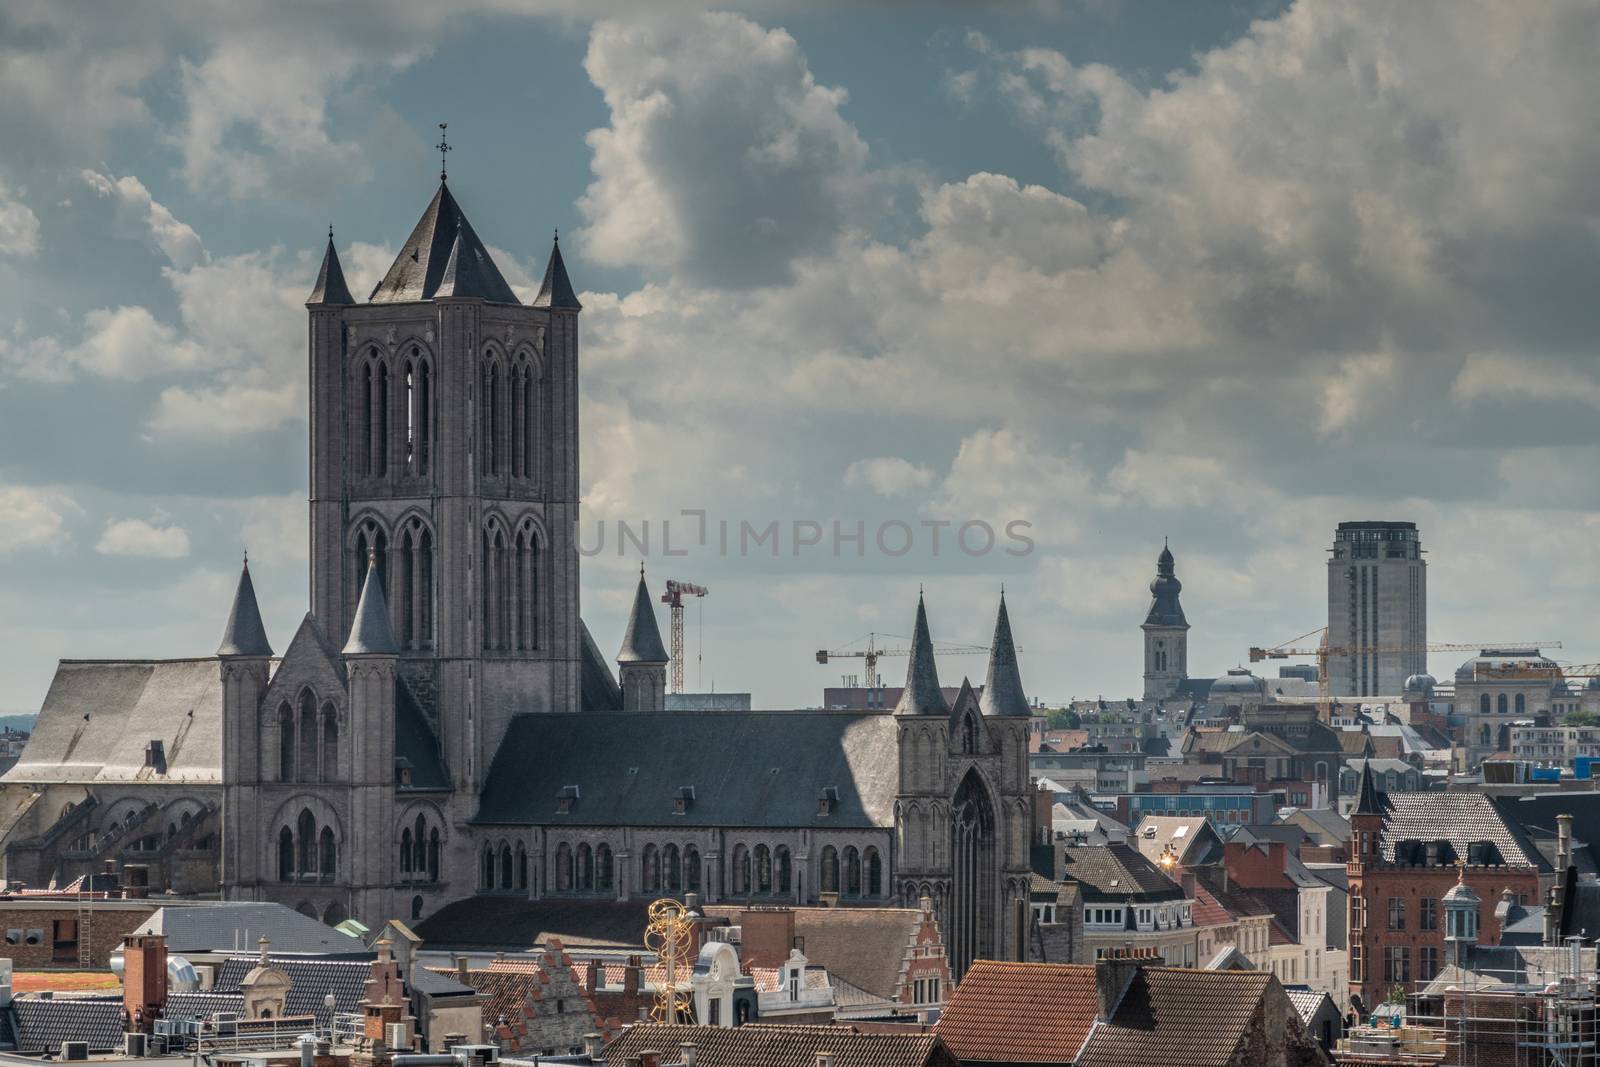 Gent, Flanders, Belgium -  June 21, 2019: Shot from castle tower, view over city roofs shows Sint Niklaas church with in back towers of University and Onze-Lieve-Vrouw-Sint-Pieters church under heavy cloudscape.